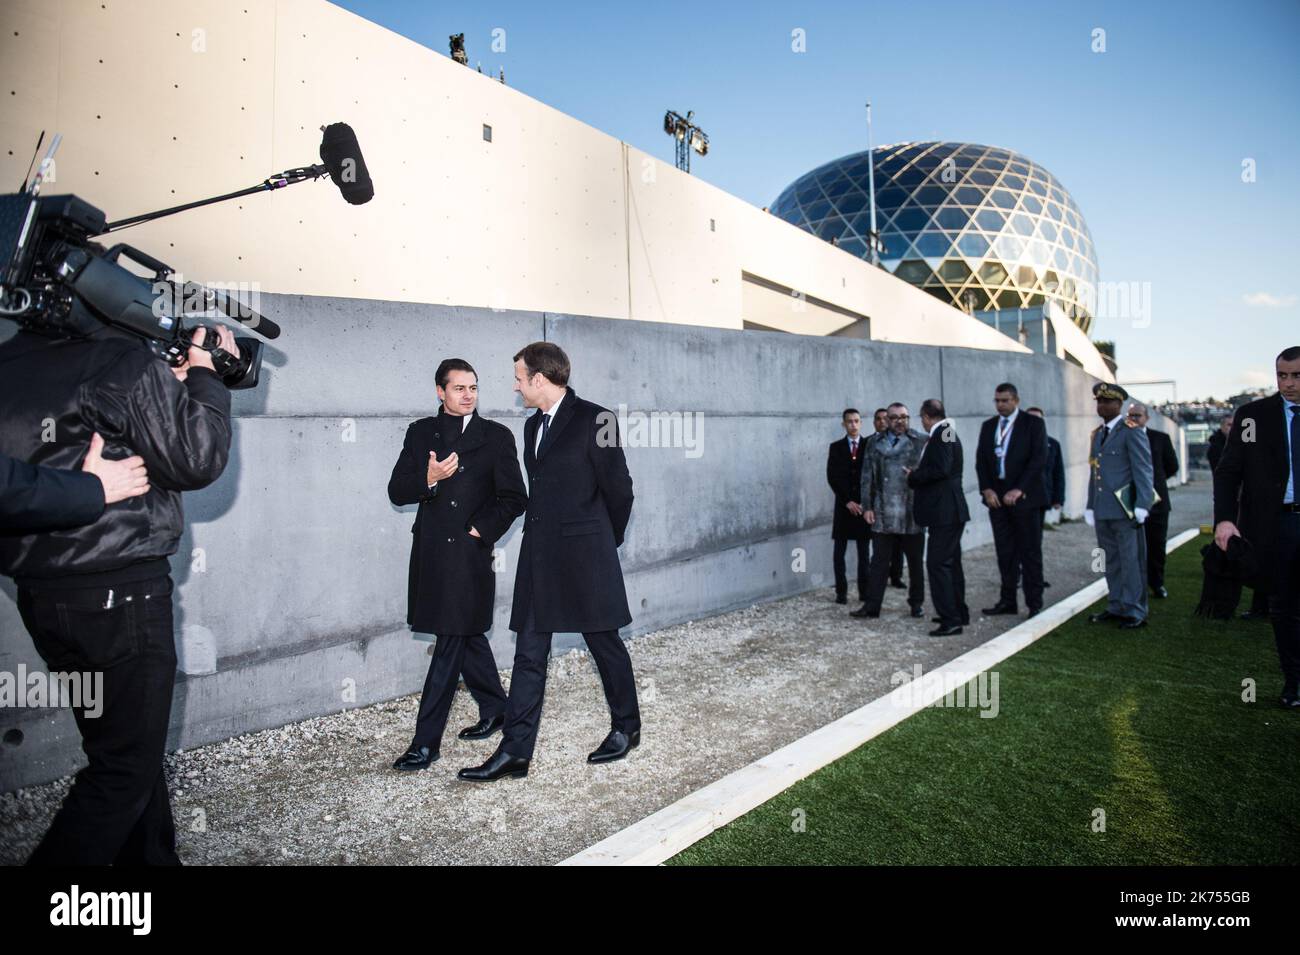 French President Emmanuel Macron (L) and Mexican President Enrique Pena Nieto talk upon their arrival to the One Planet Summit on December 12, 2017, at La Seine Musicale venue on the ile Seguin in Boulogne-Billancourt, southwest of Paris.  Stock Photo